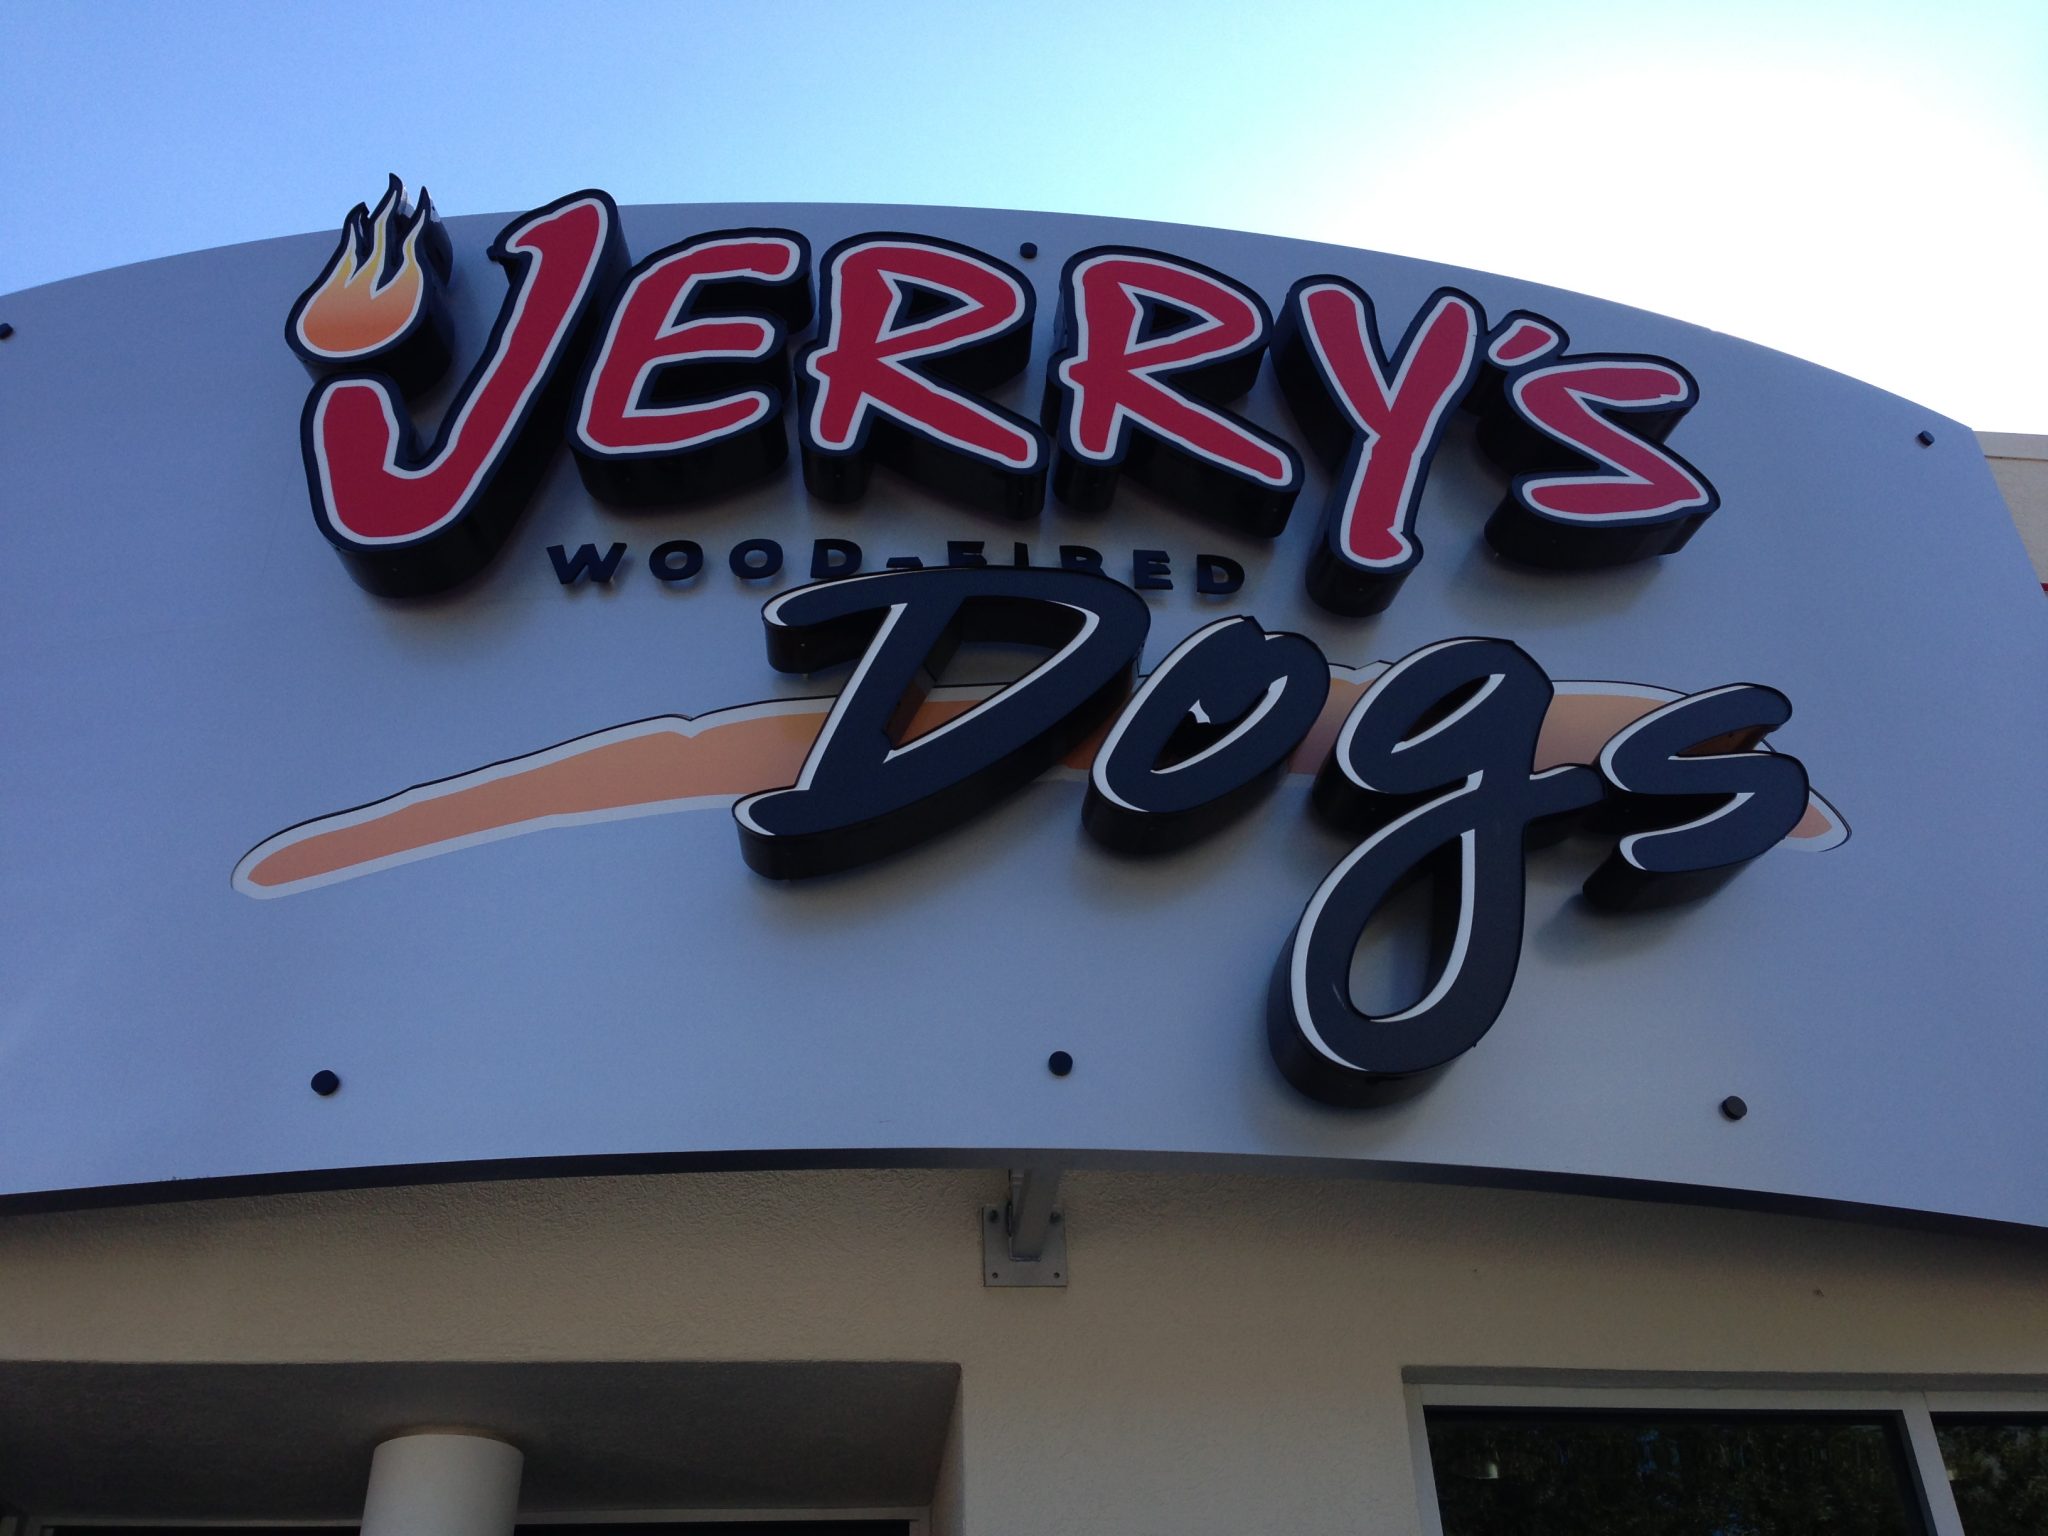 Jerry's Wood-Fired Dogs signage at 6340 Gaston.